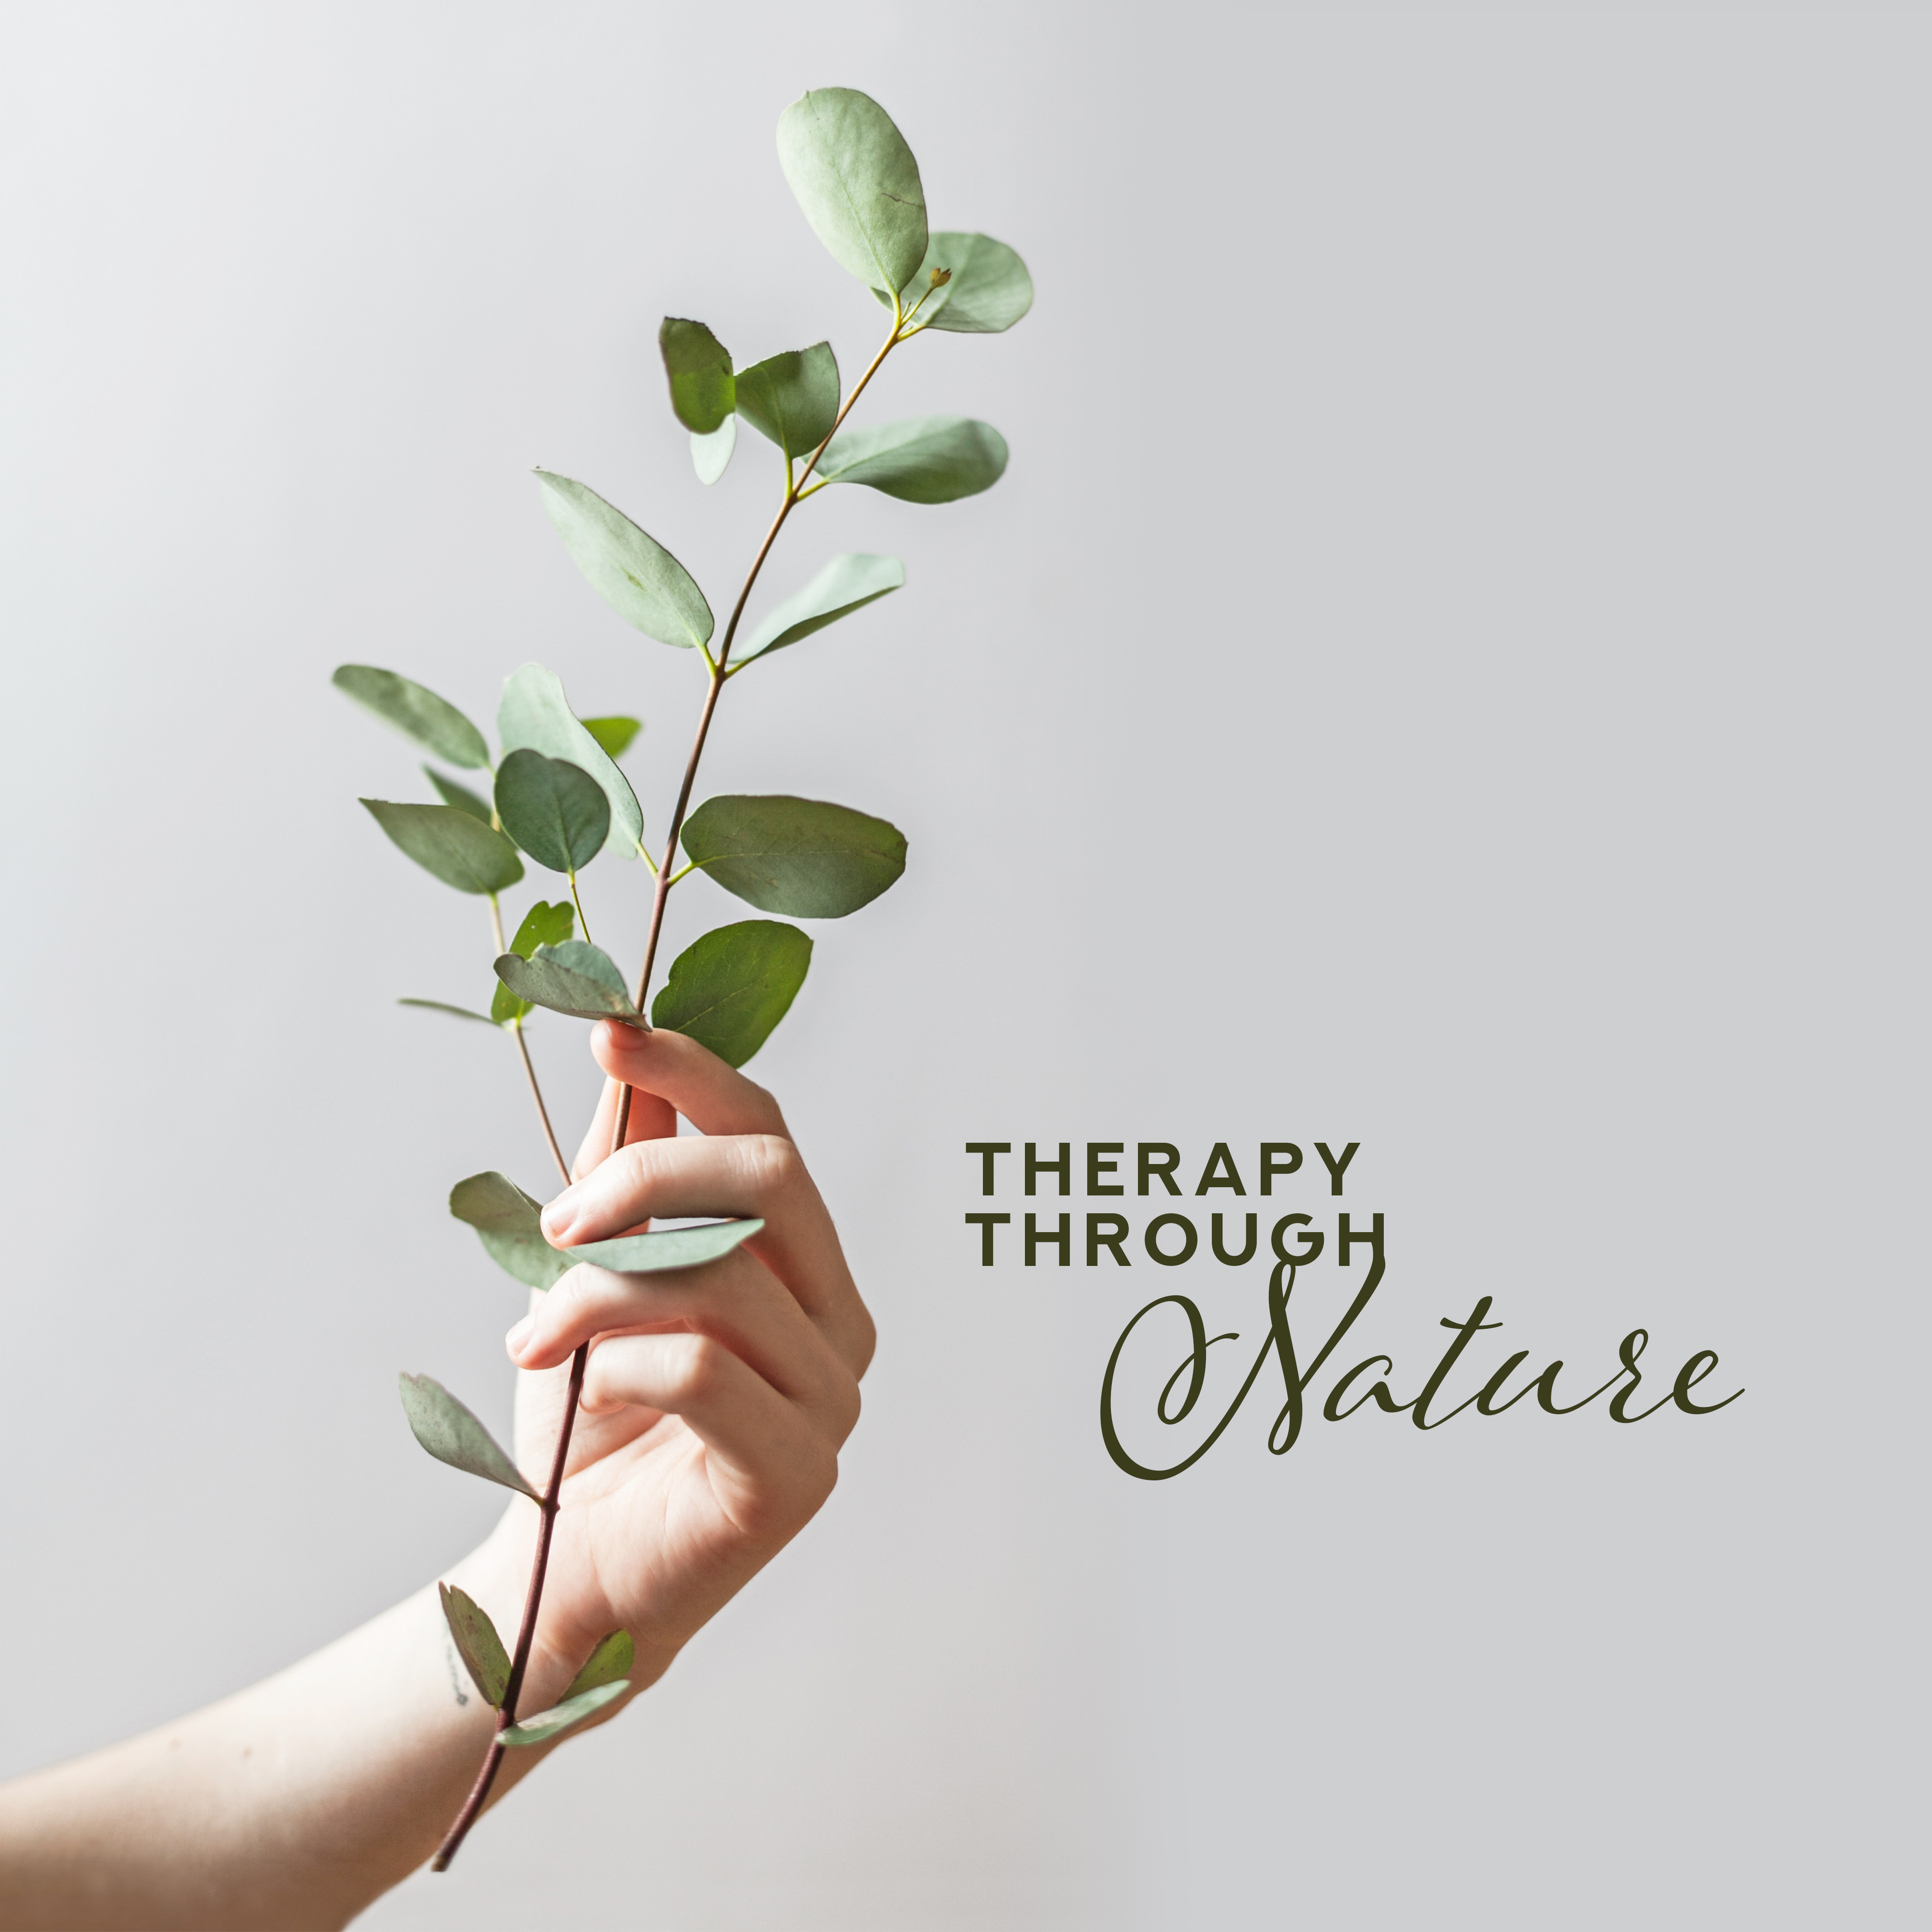 Therapy through Nature: Relaxing Melodies of Nature for Spa, Relaxation, Massage, Rest and Stress Relief